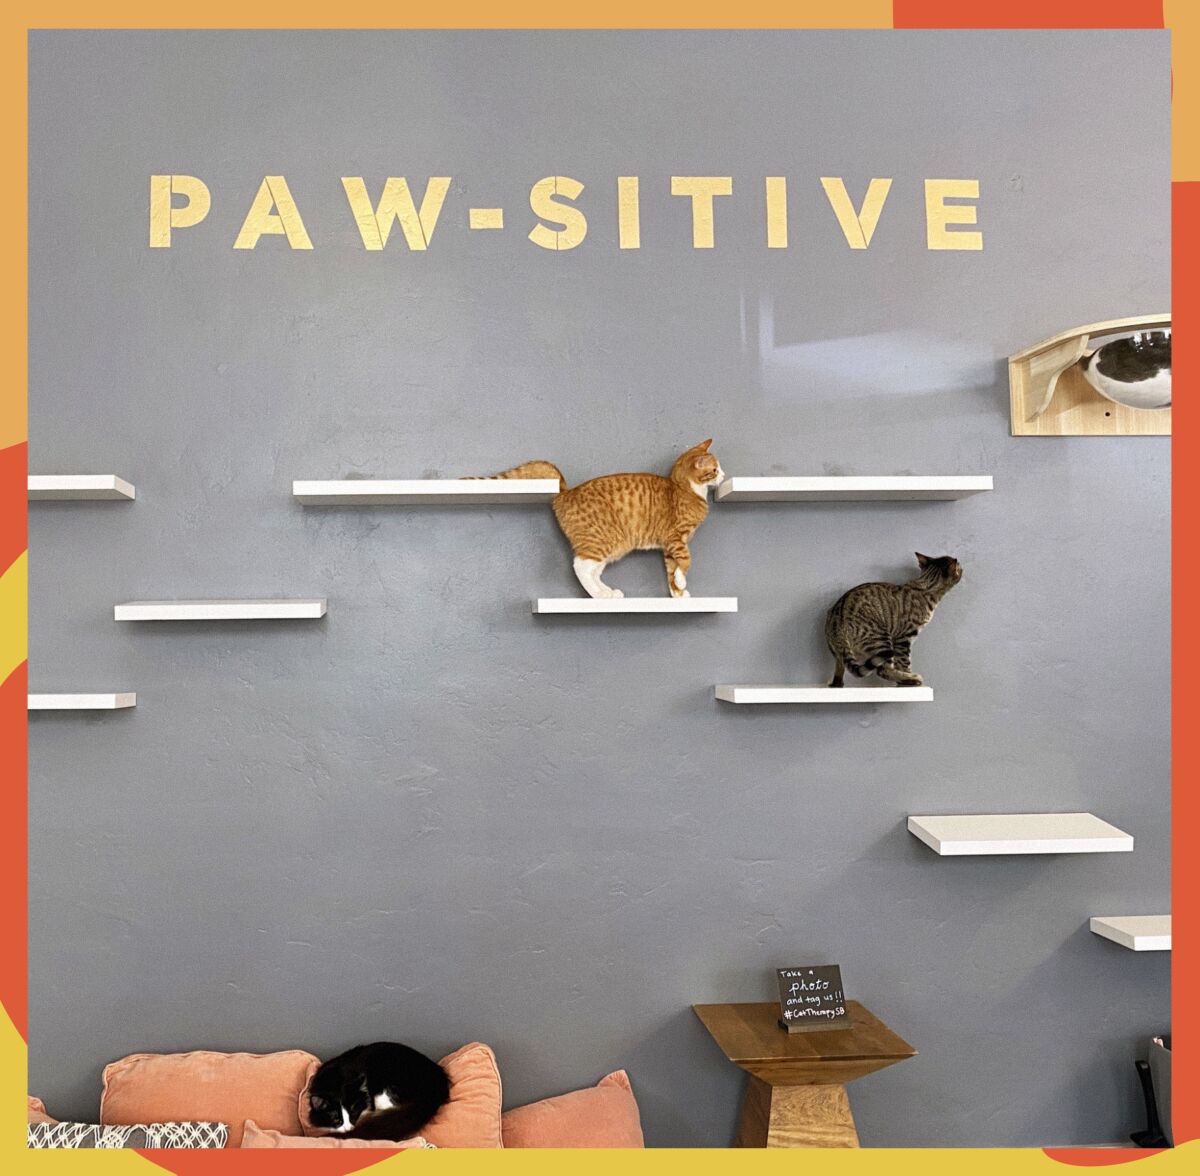 Cats walk on short shelves that extend from a wall; lettering spells out "Paws-itive."